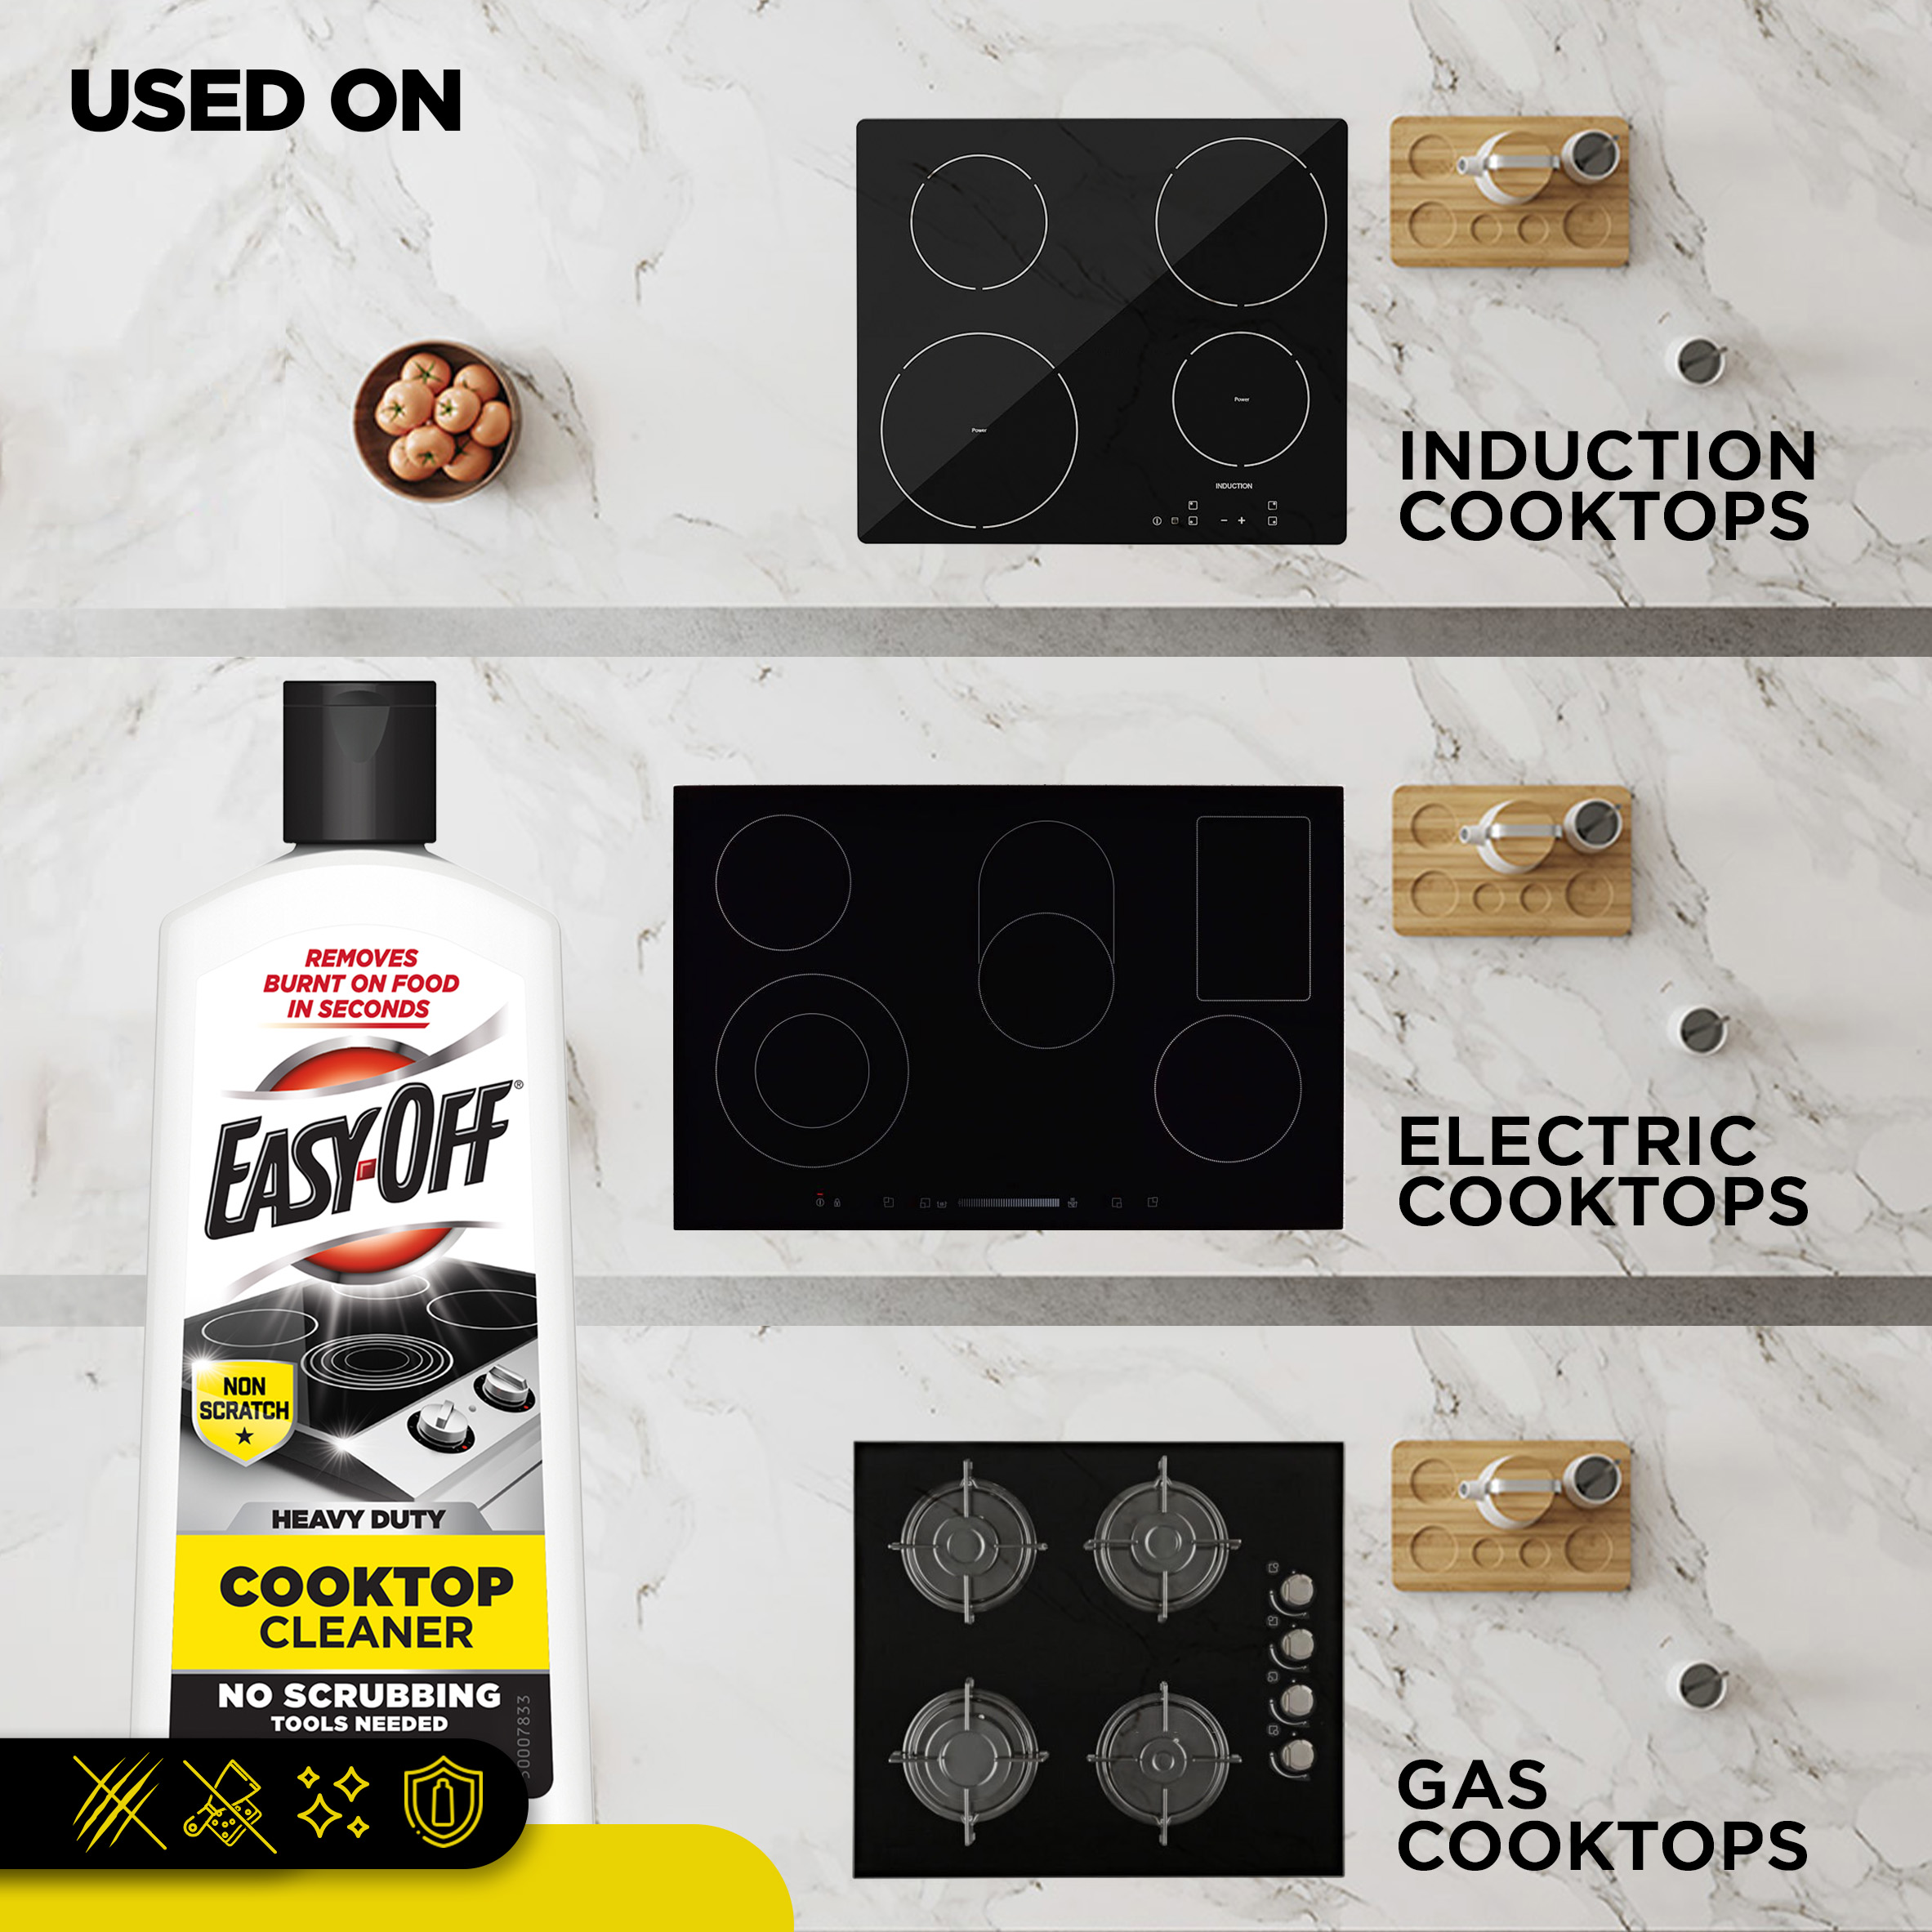 Glass Cooktop Cleaner and Polish 13,52 Fl Oz - Induction Cooktop Hob Cleaner  - Degreaser Cleaner Heavy Duty - Glass Stovetop Cleaner Safely Cleans  without Scratches - Glass Top Stove Cleaner